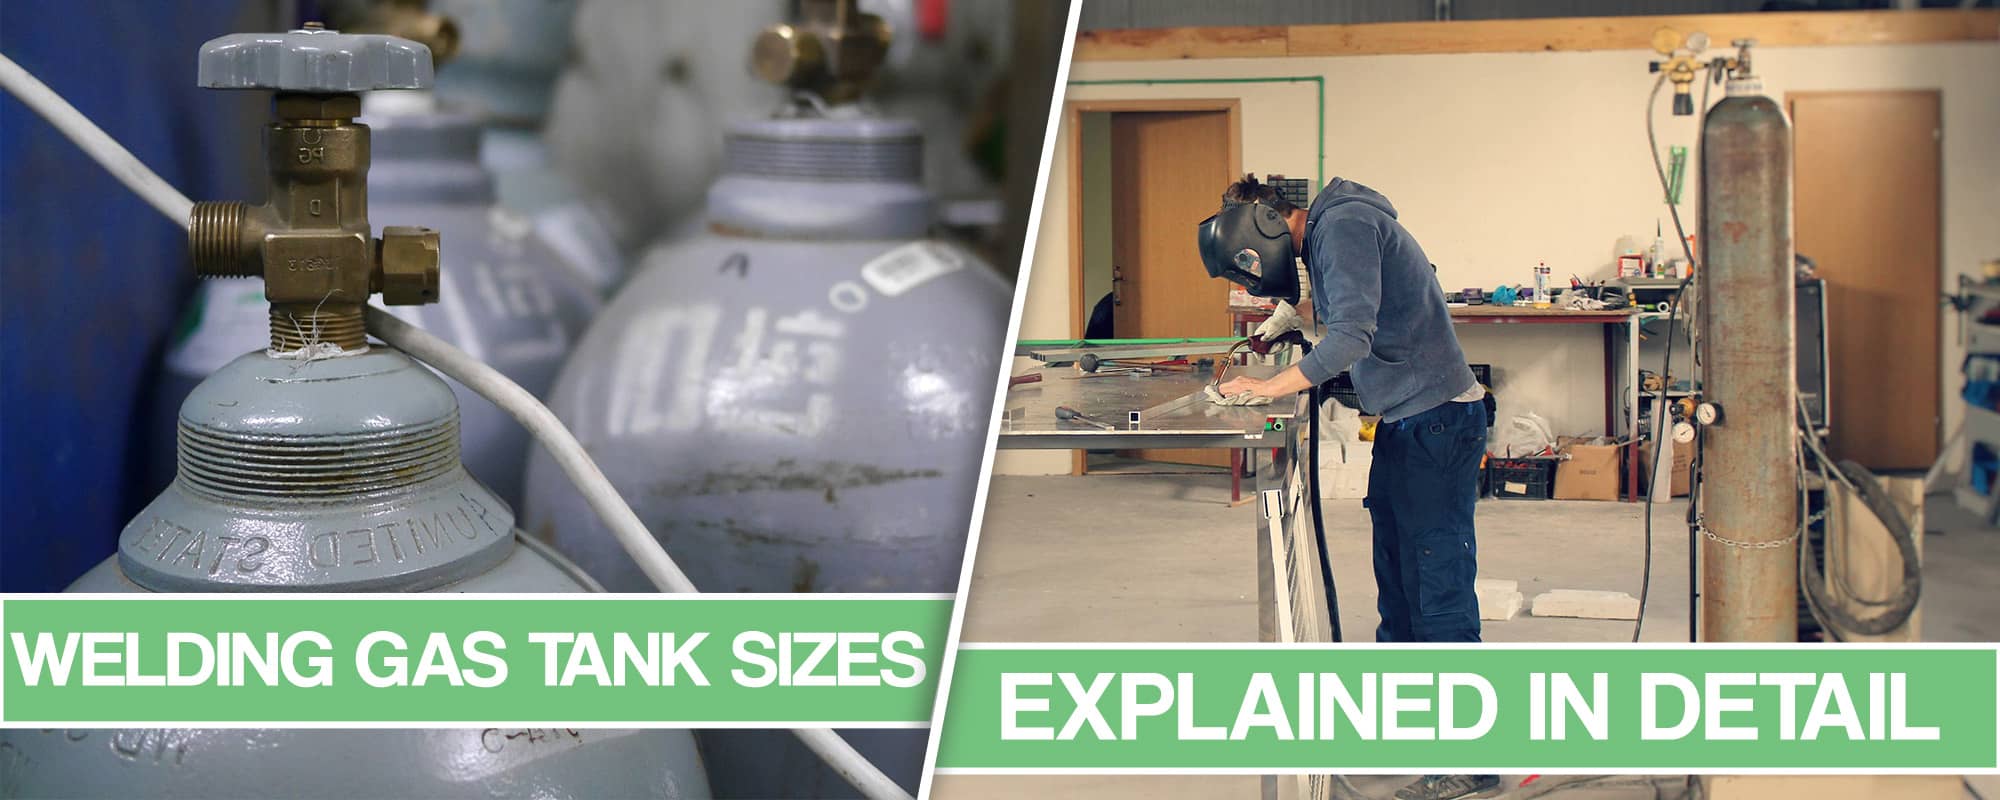 Feature image for Welding tank sizes article